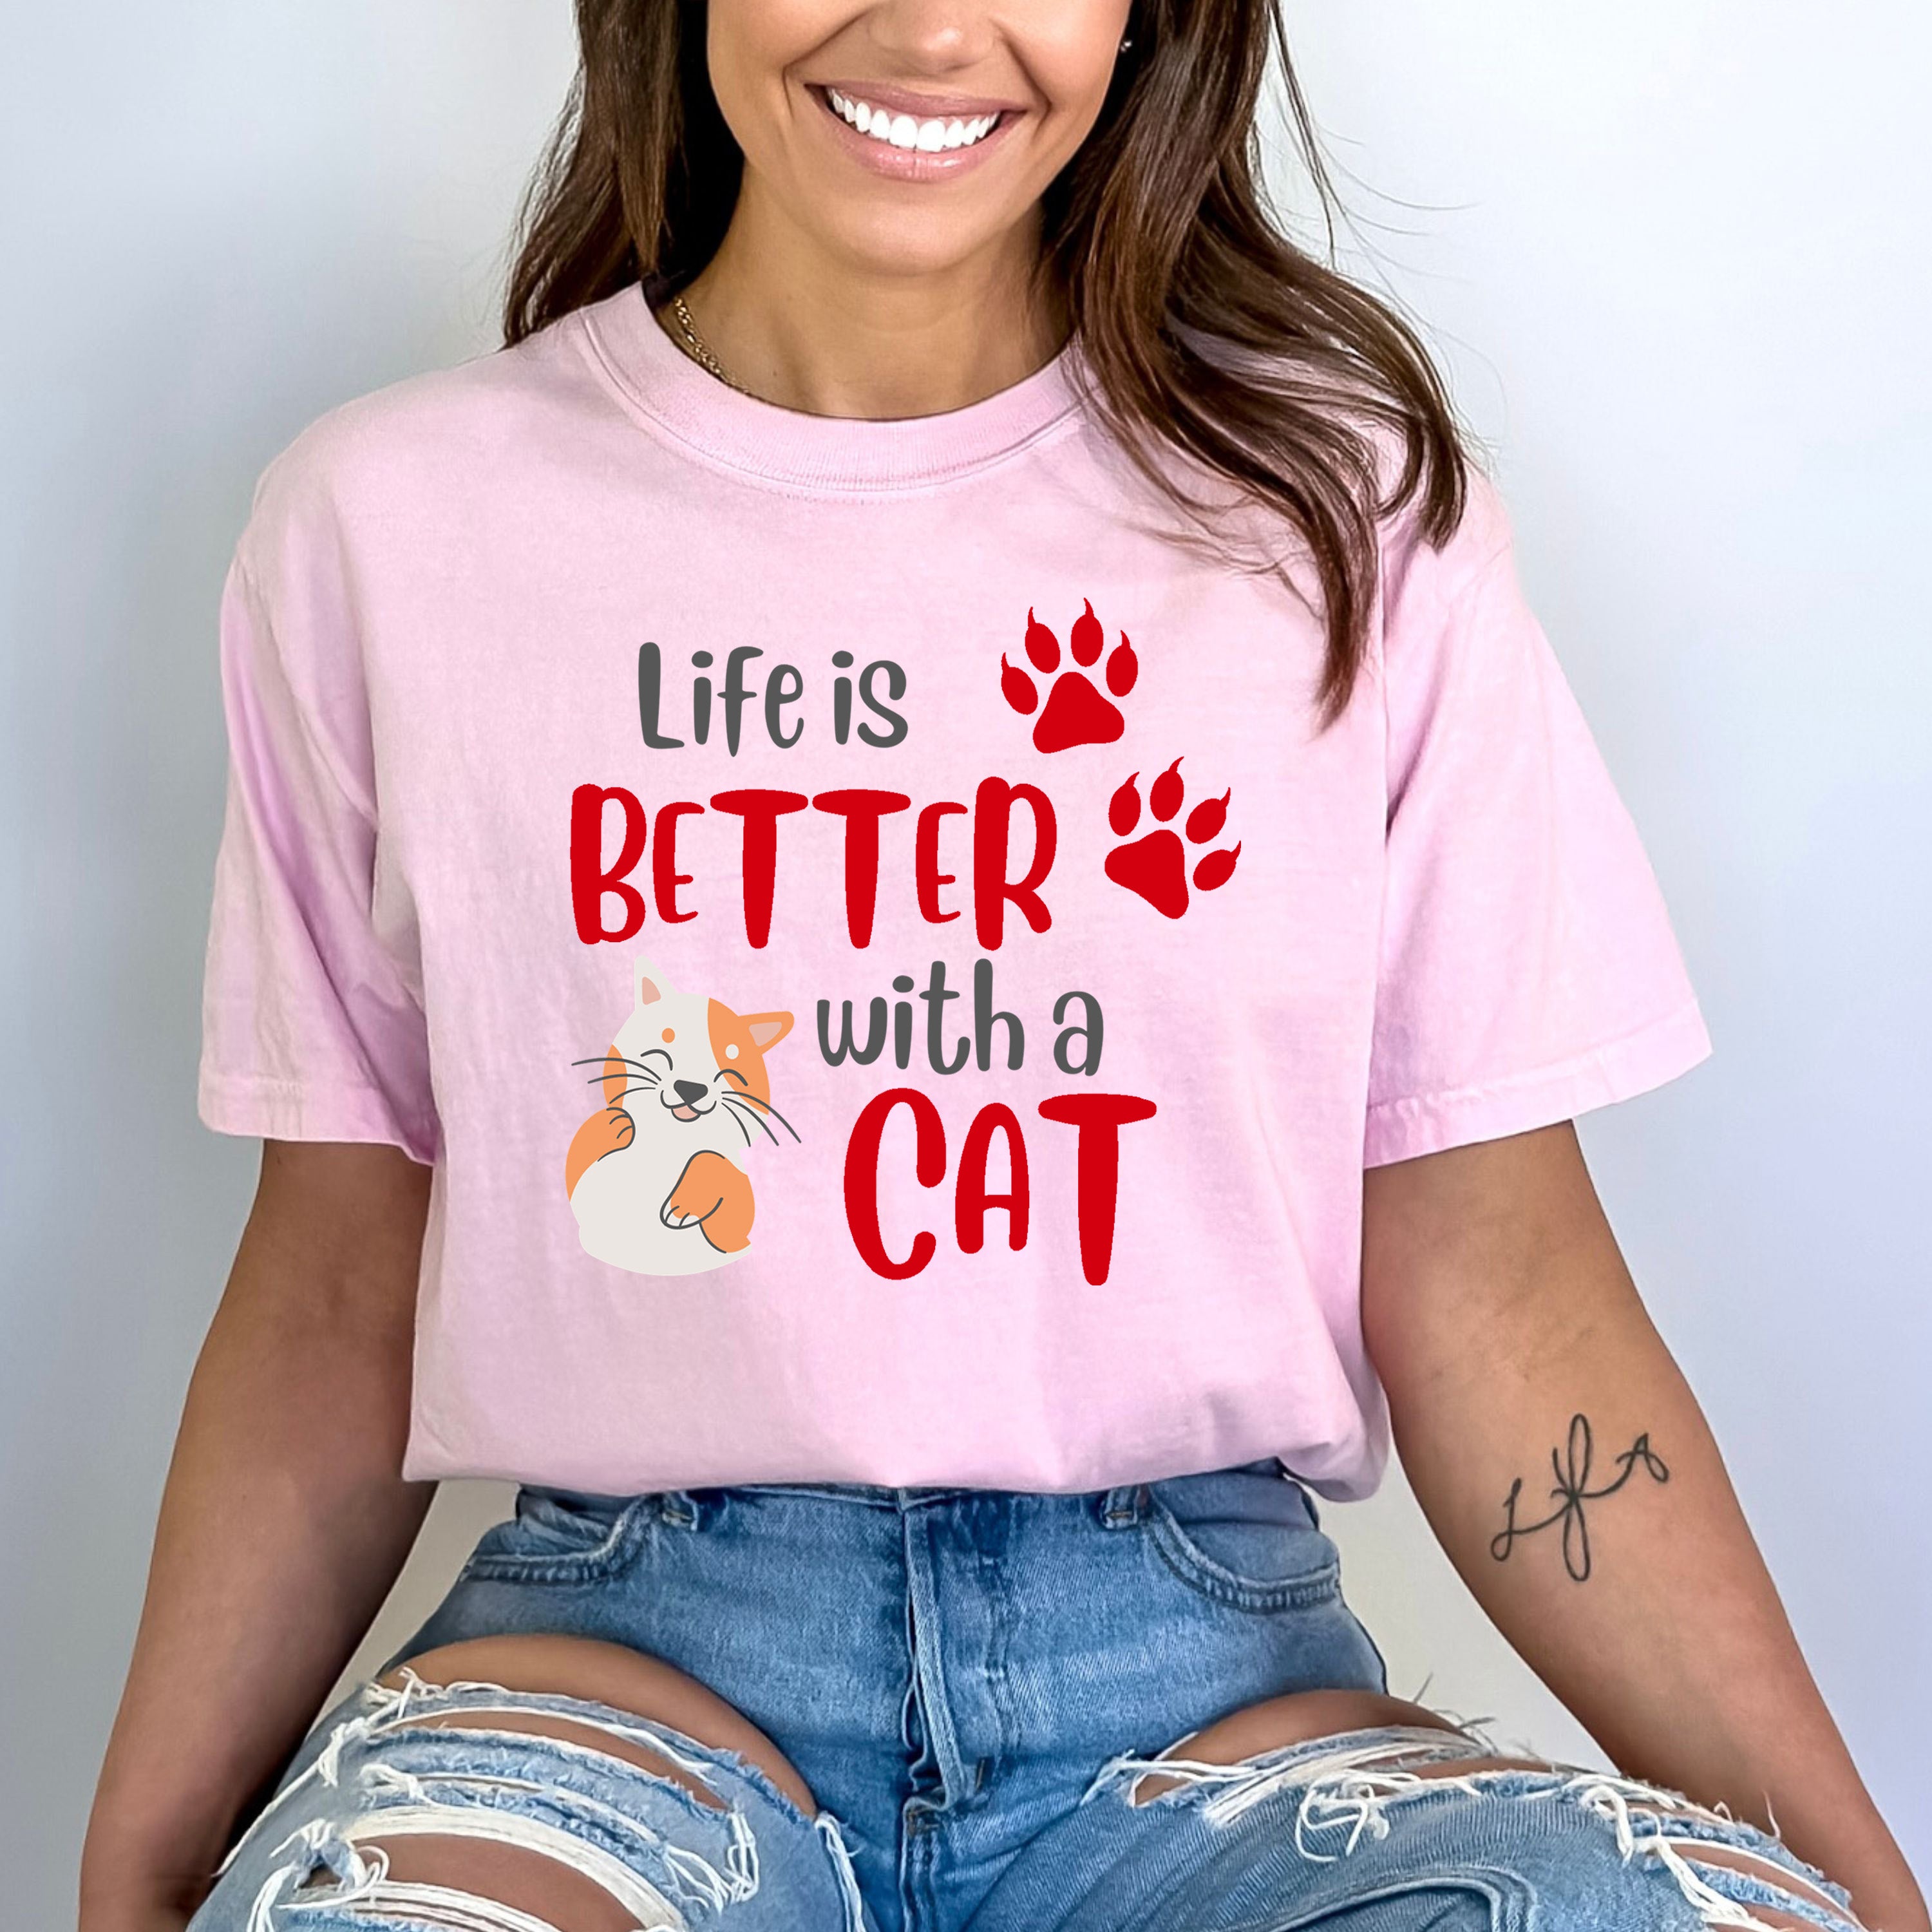 Life Is Better With Cats - Bella canvas